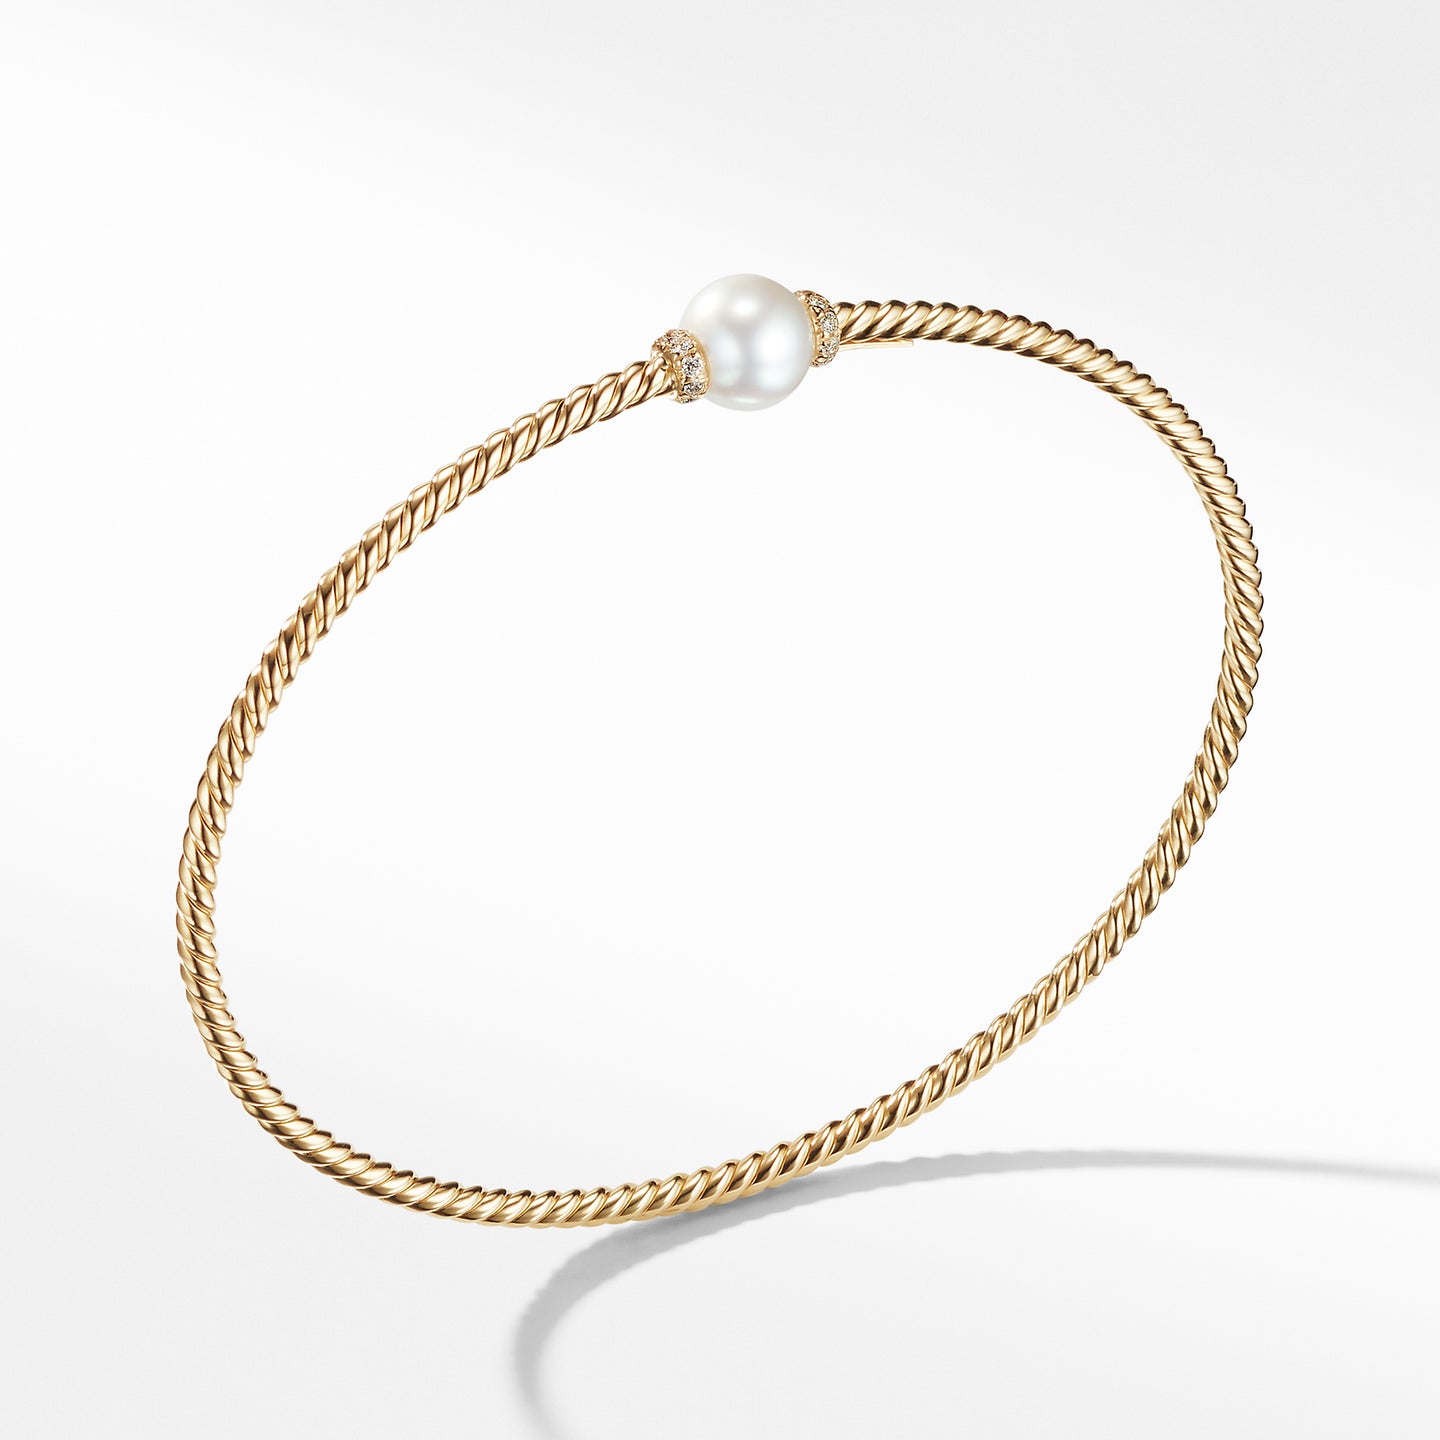 Petite Solari Station Bracelet with Cultured Pearl and Diamonds in 18K Gold, Size Medium